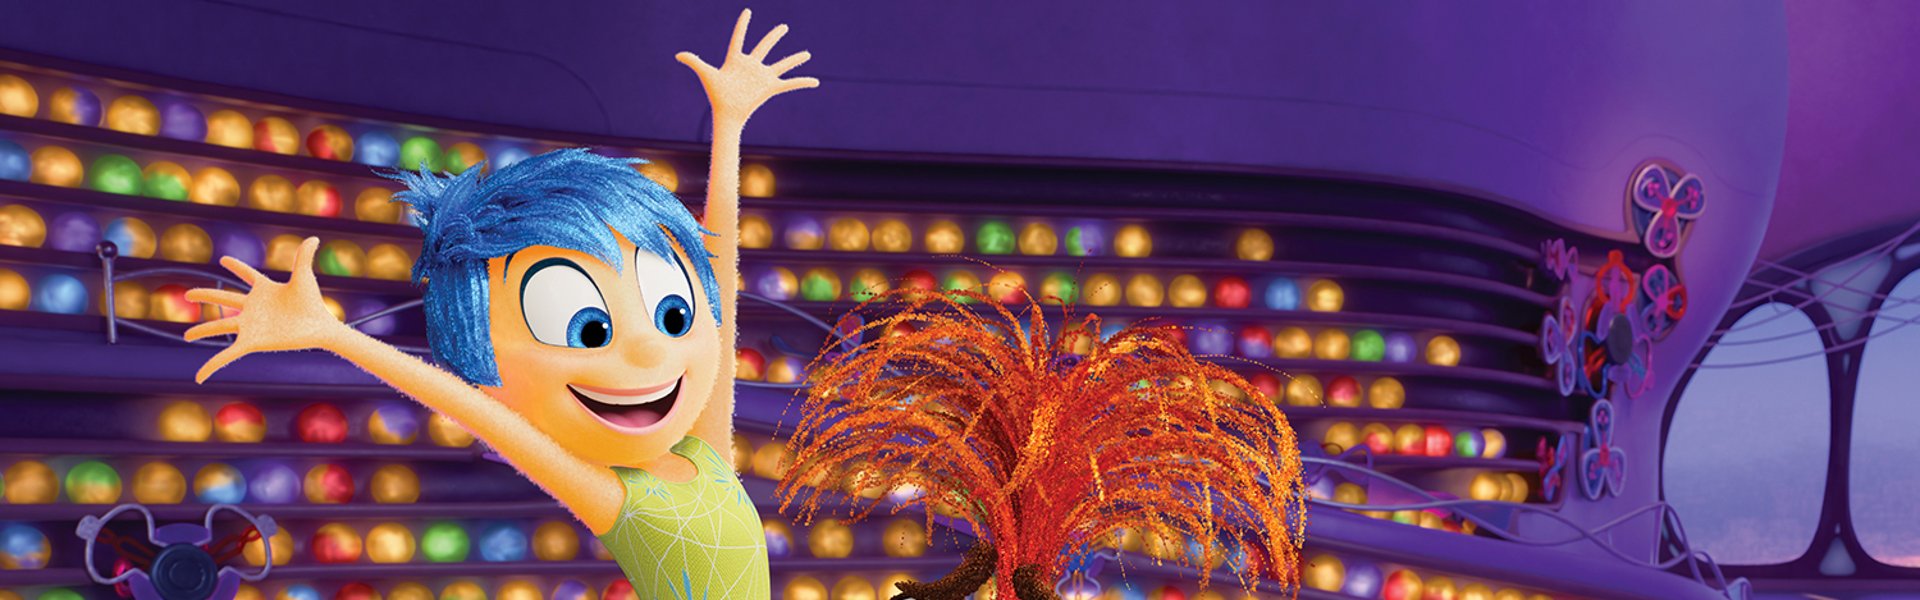 Box Office World: “Inside Out 2” Hits One Billion Dollars and Breaks Another Record